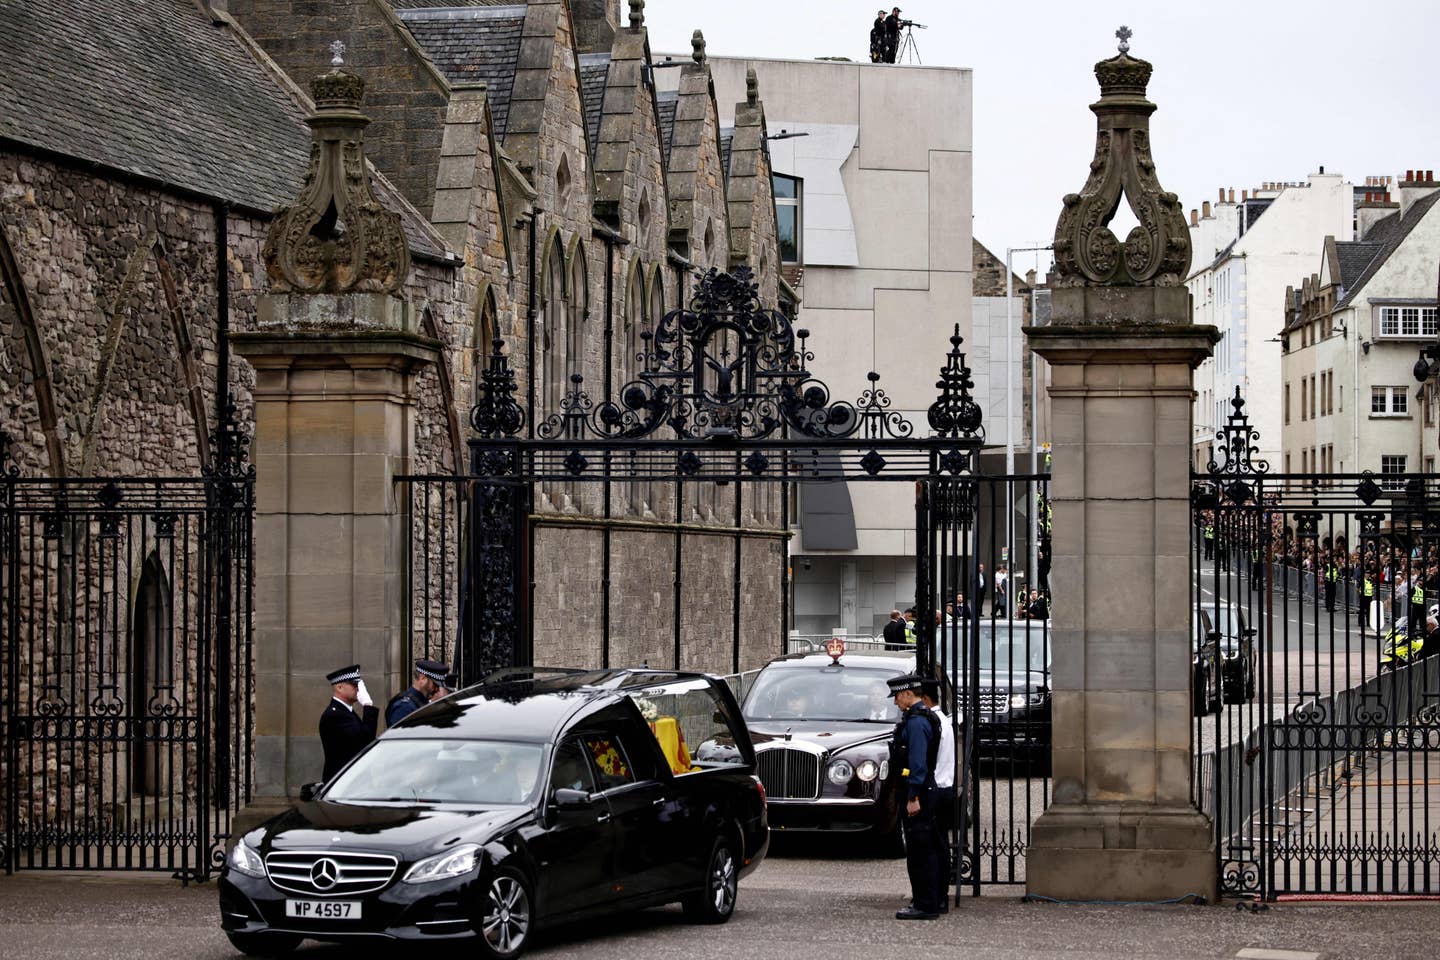 The hearse carrying the coffin of the late Queen Elizabeth II, draped with the Royal Standard of Scotland, arrives at the Palace of Holyroodhouse, in Edinburgh on September 11, 2022. - Queen Elizabeth II's coffin will travel by road through Scottish towns and villages on Sunday as it begins its final journey from her beloved Scottish retreat of Balmoral. The Queen, who died on September 8, will be taken to the Palace of Holyroodhouse before lying at rest in St Giles' Cathedral, before travelling onwards to London for her funeral.. (Photo by ALKIS KONSTANTINIDIS / POOL / AFP) (Photo by ALKIS KONSTANTINIDIS/POOL/AFP via Getty Images)